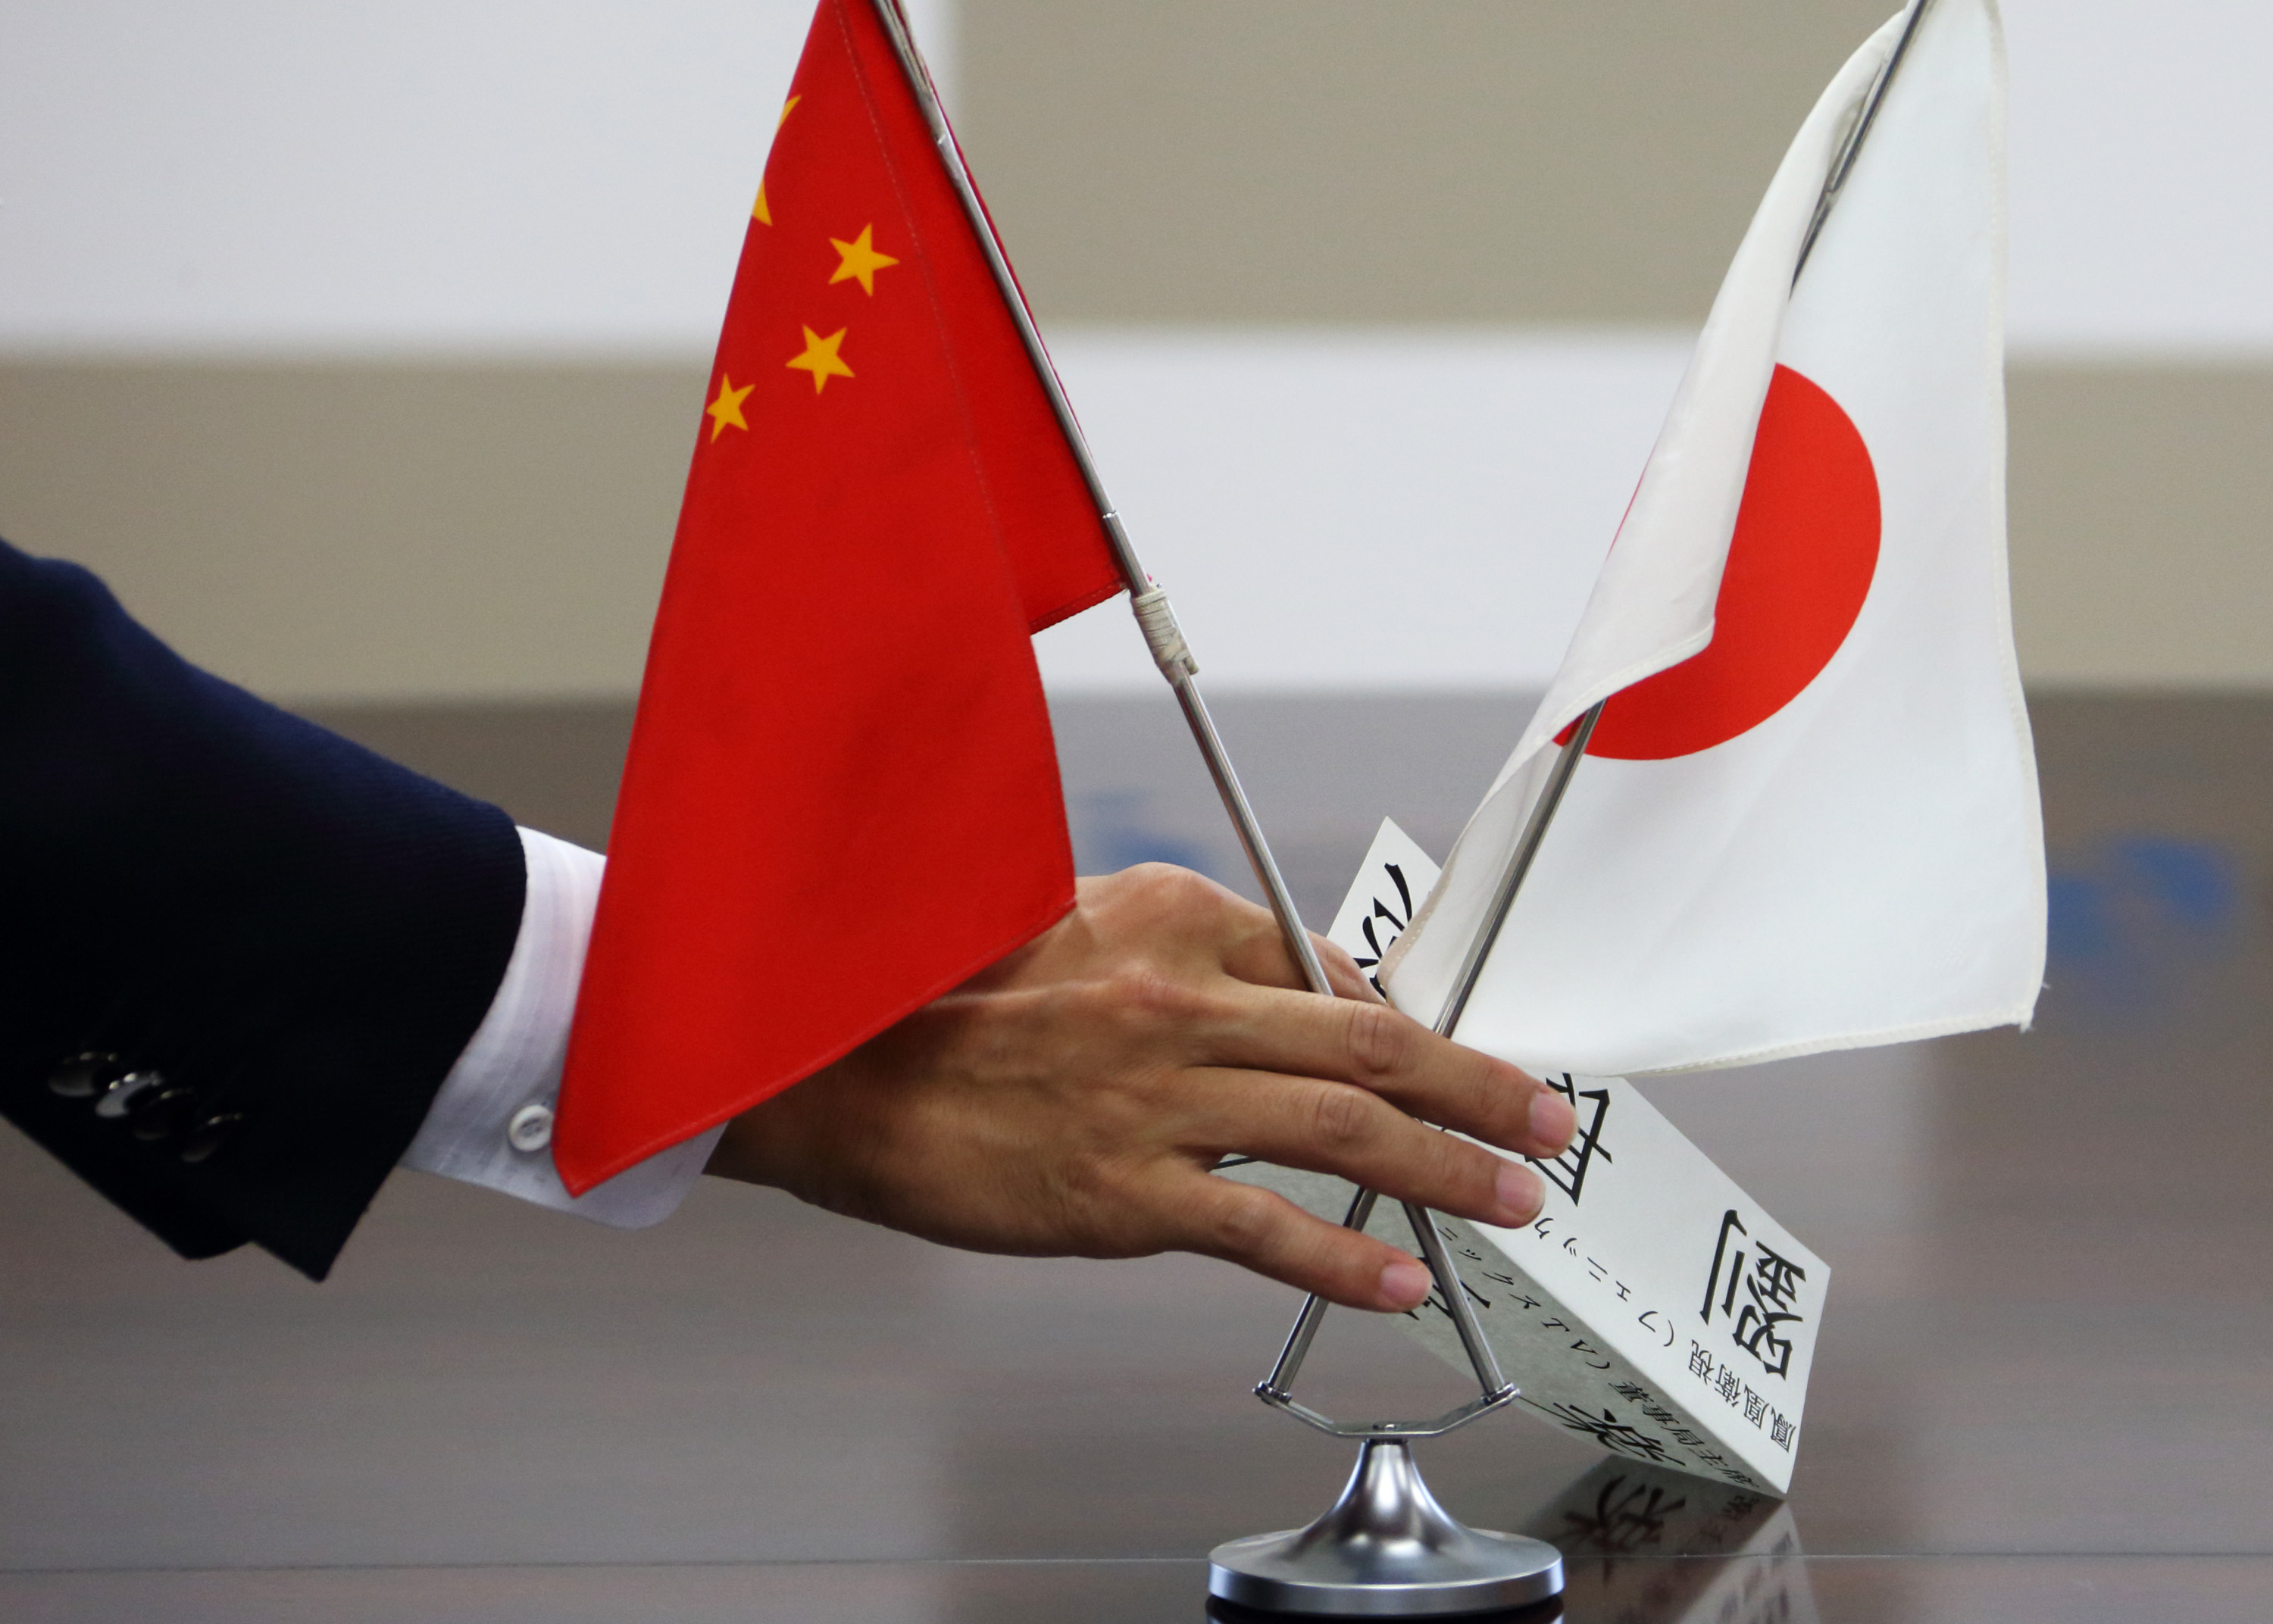 A staff member of Japan's Ministry of Economy, Trade and Industry arranges Chinese and Japanese flags before a meeting with a group of Chinese business leaders in Tokyo on Sept. 26, 2013 (Bloomberg/Getty Images)